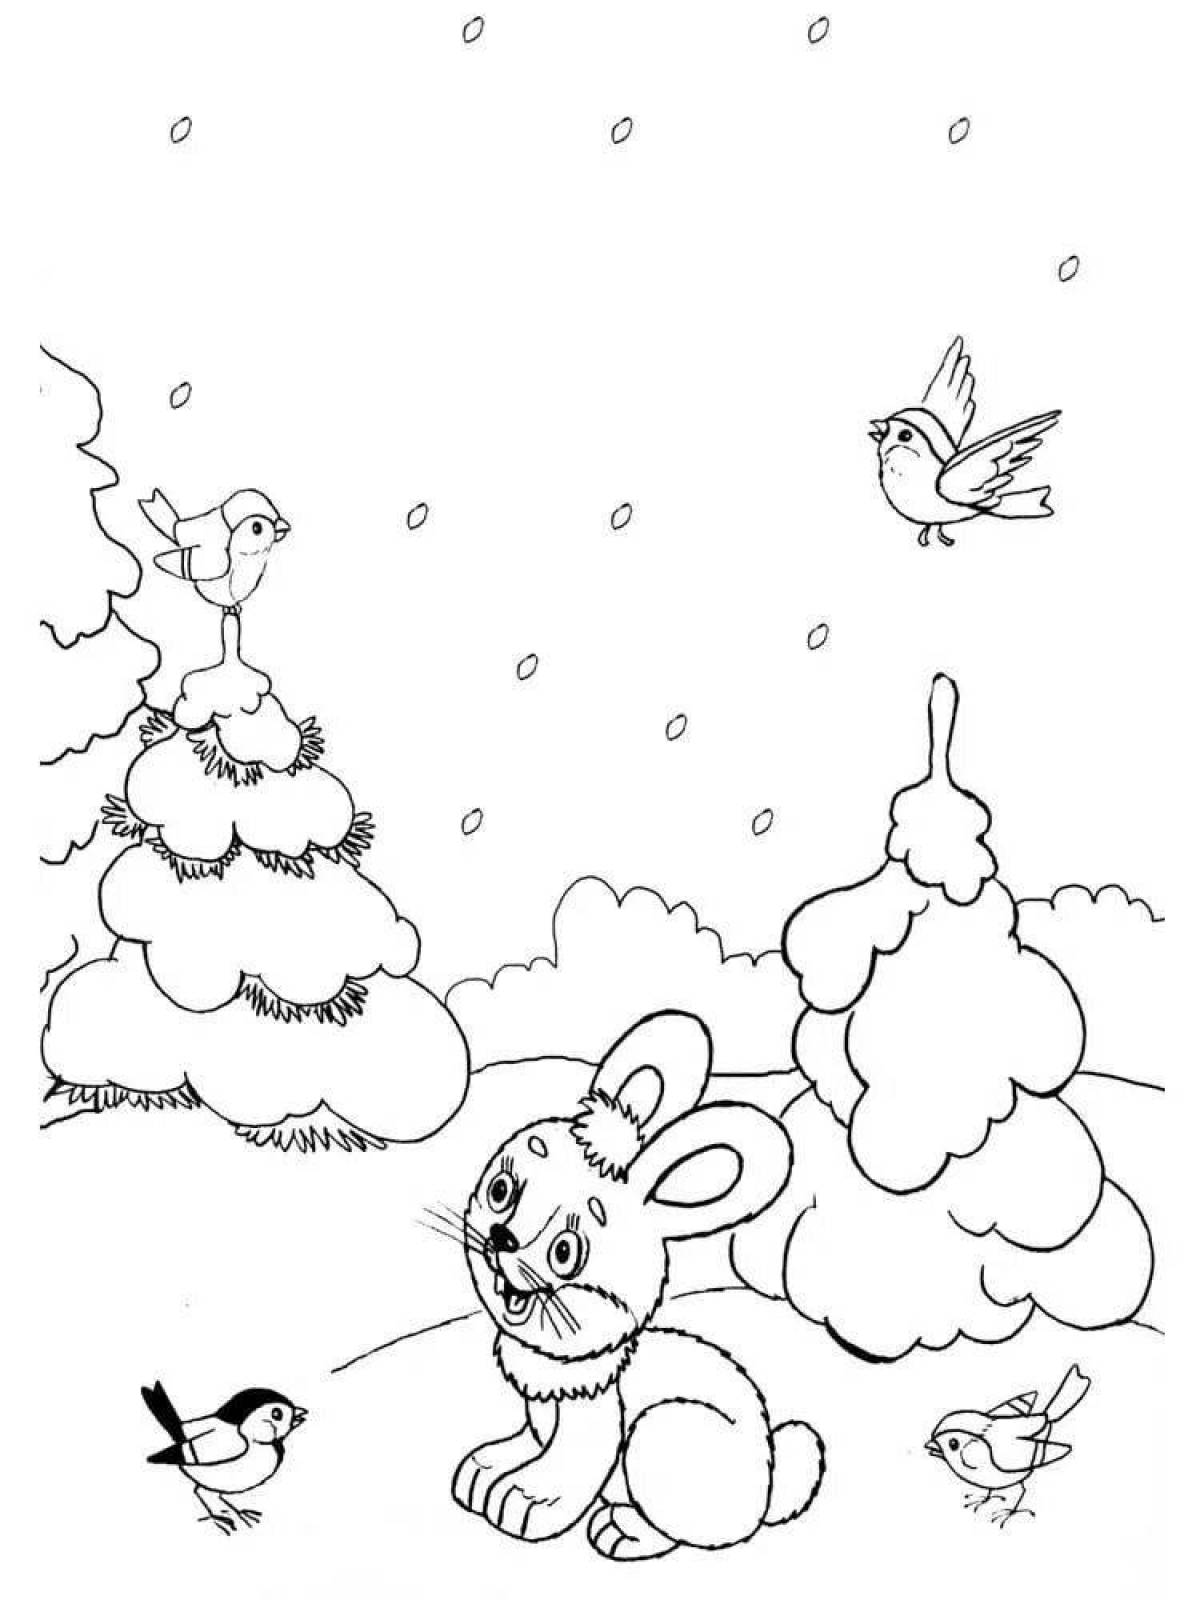 Coloring book shining winter forest for 4-5 year olds